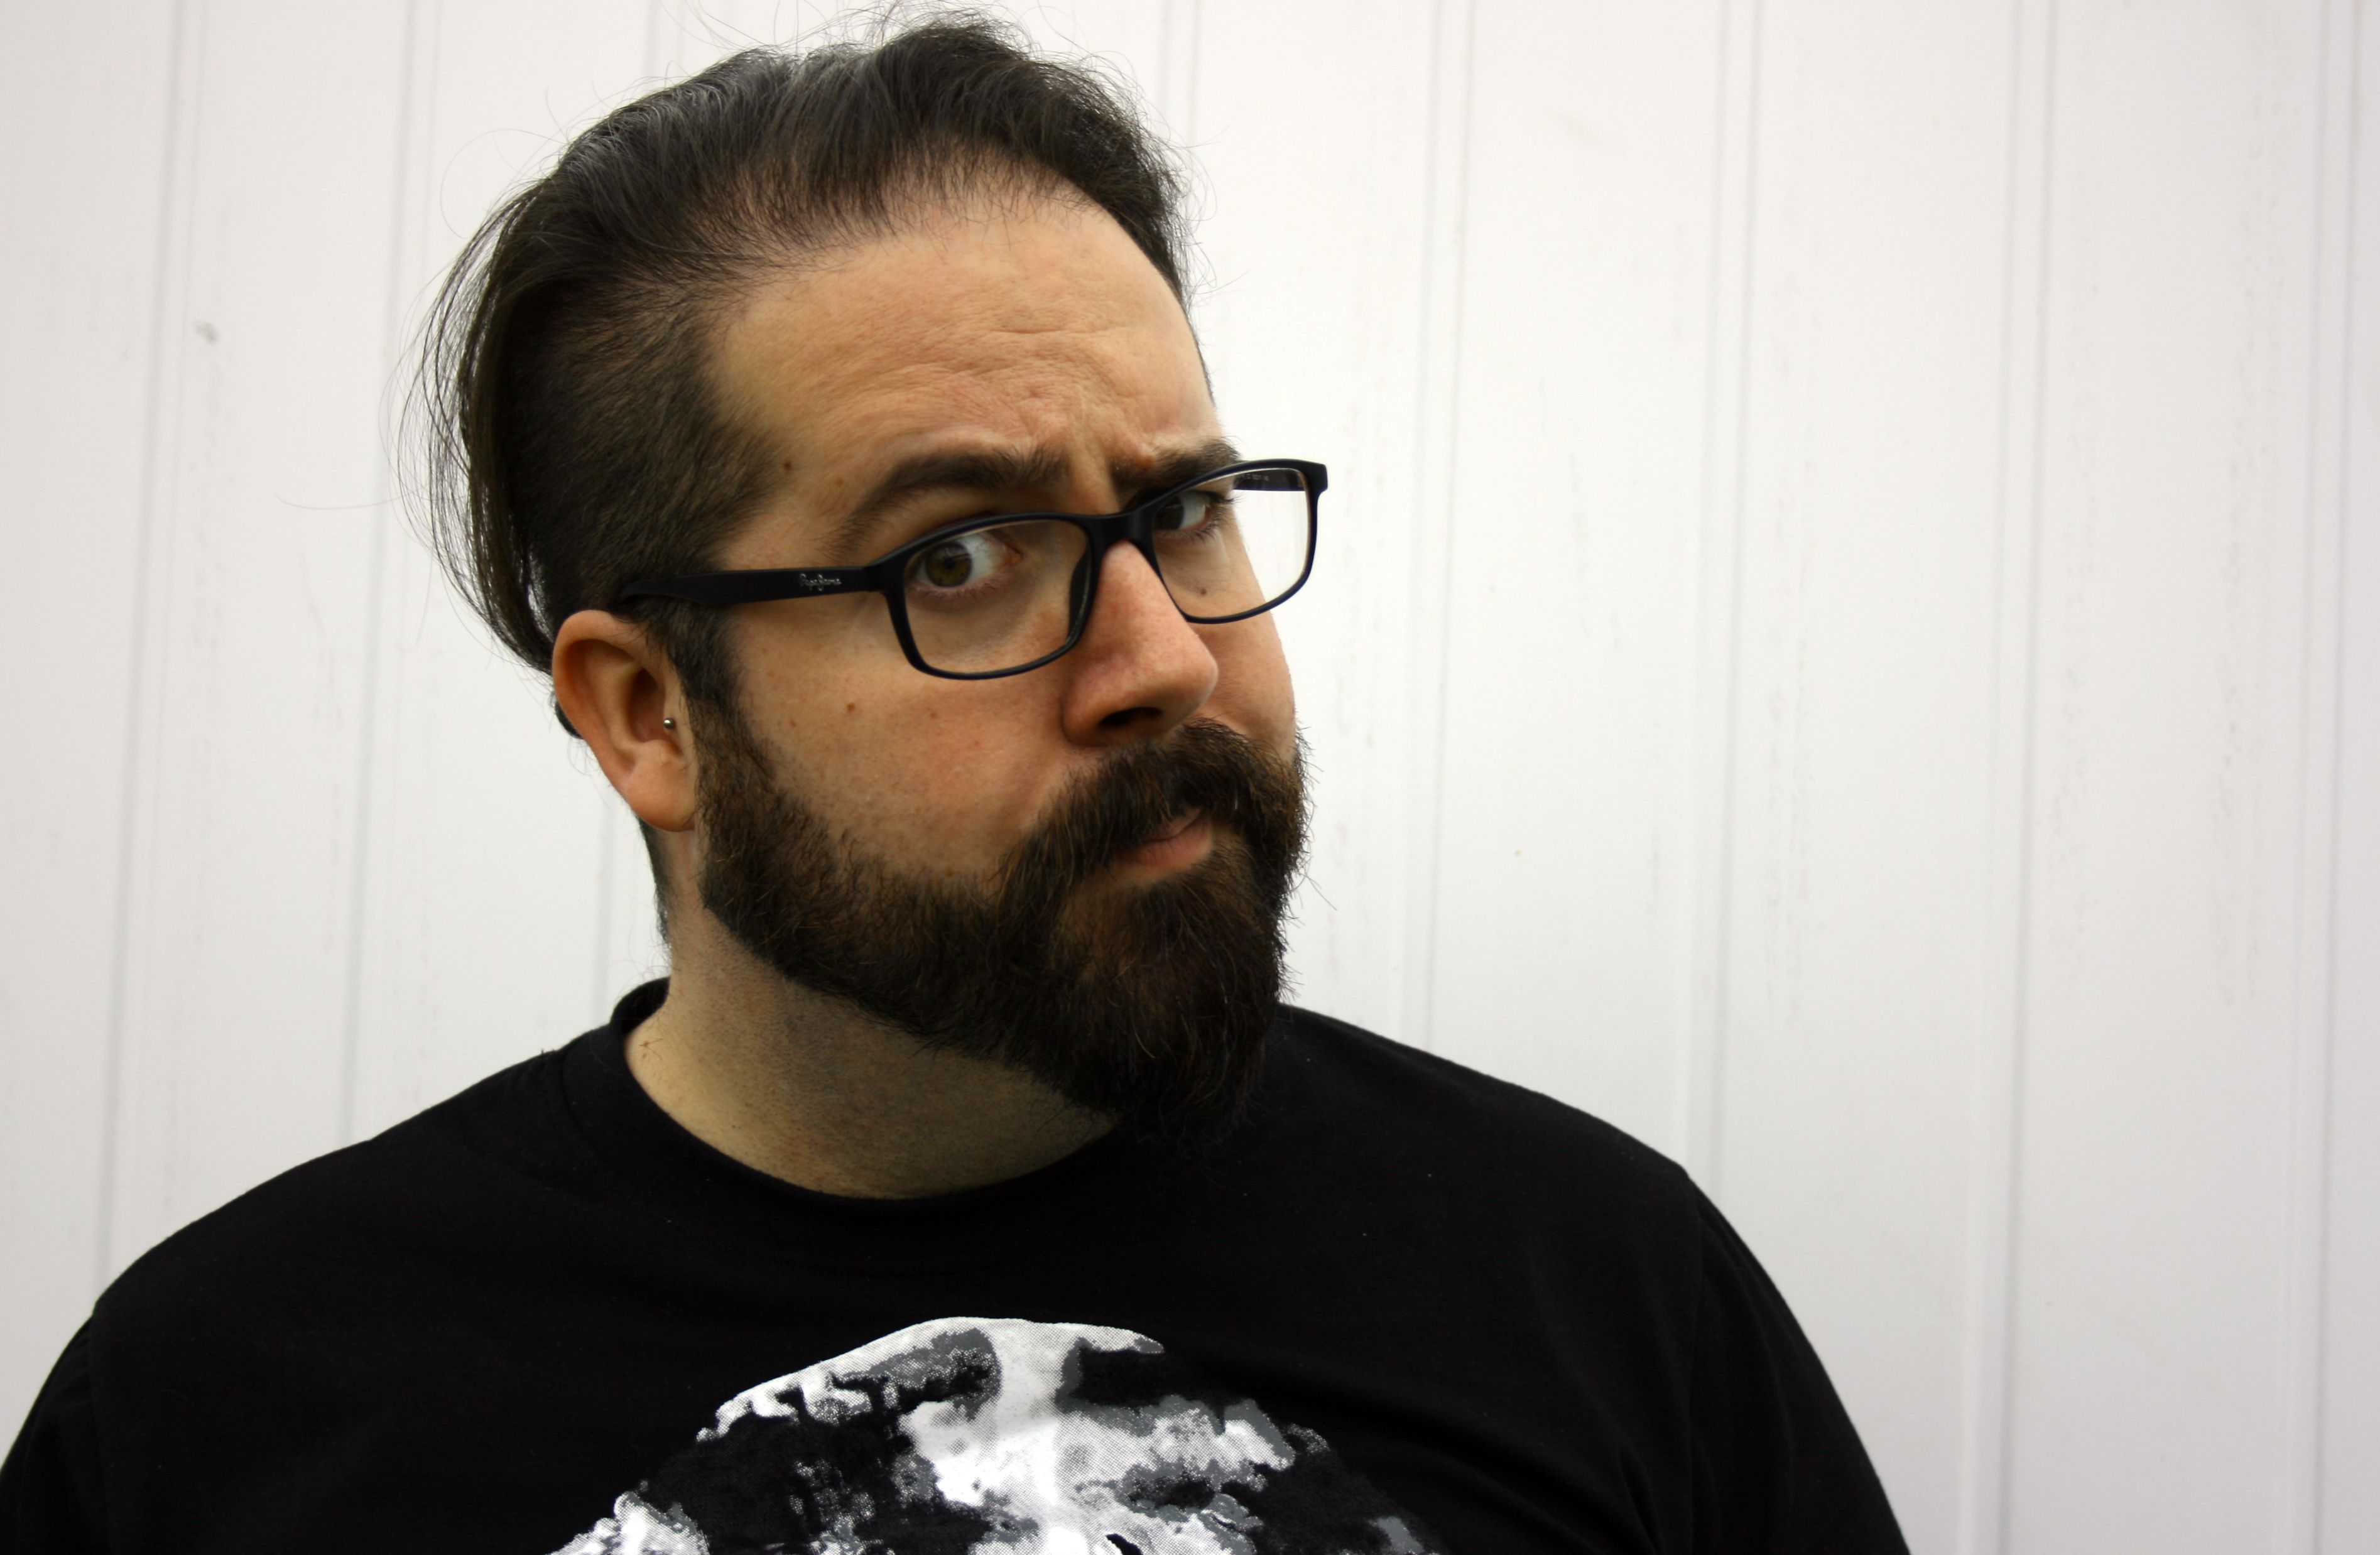 The head and shoulders of a white man with short black hair, and a short, bushy black beard and mustache. He is wearing square black glasses and is raising one eyebrow quizzically at the camera.